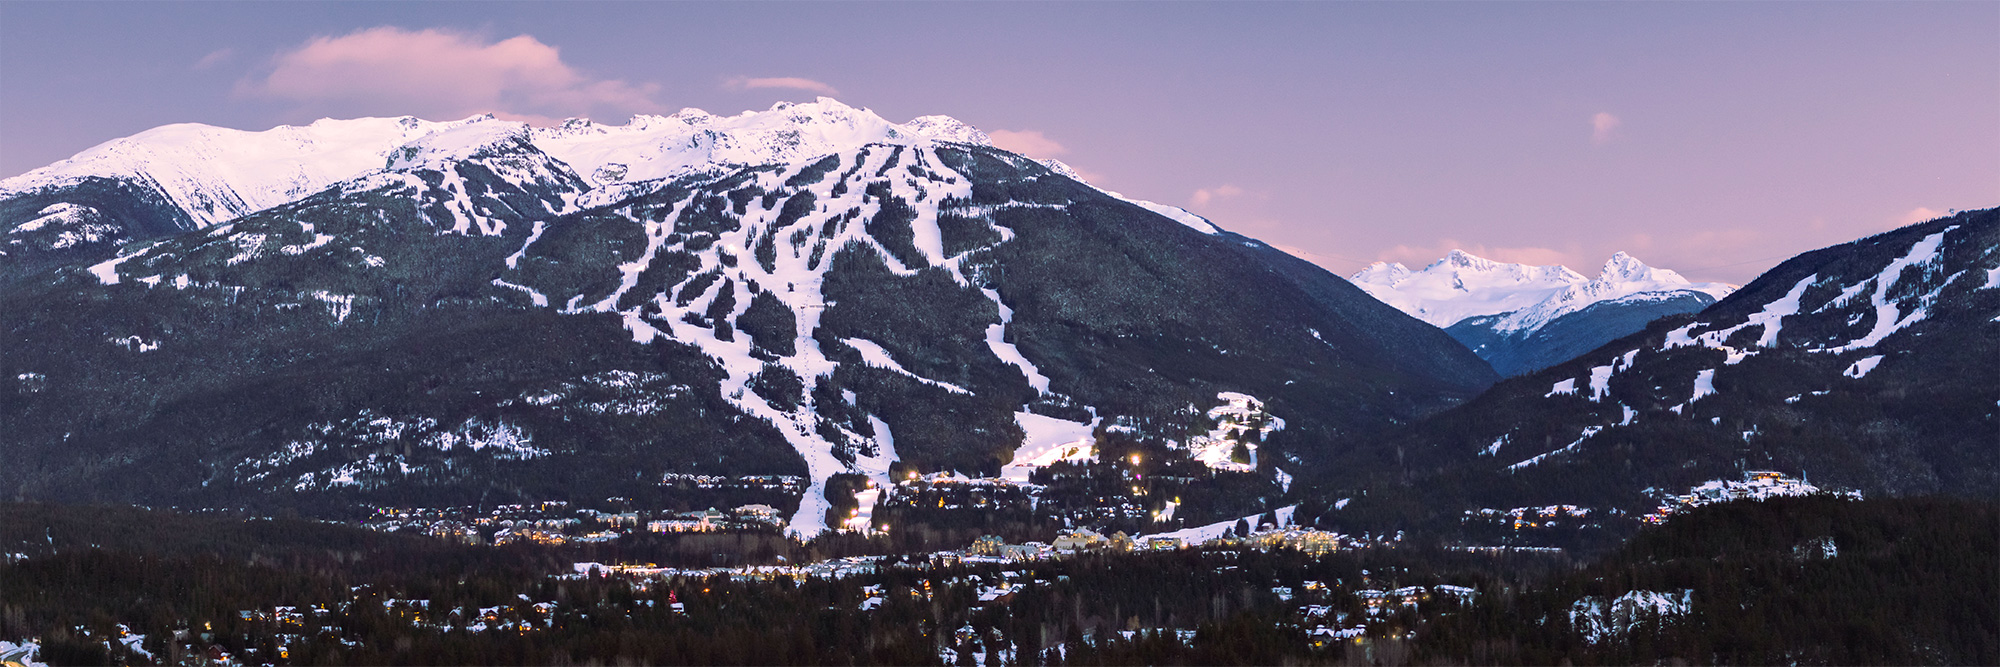 Luxury Whistler Ski Vacations: A Day in the Life